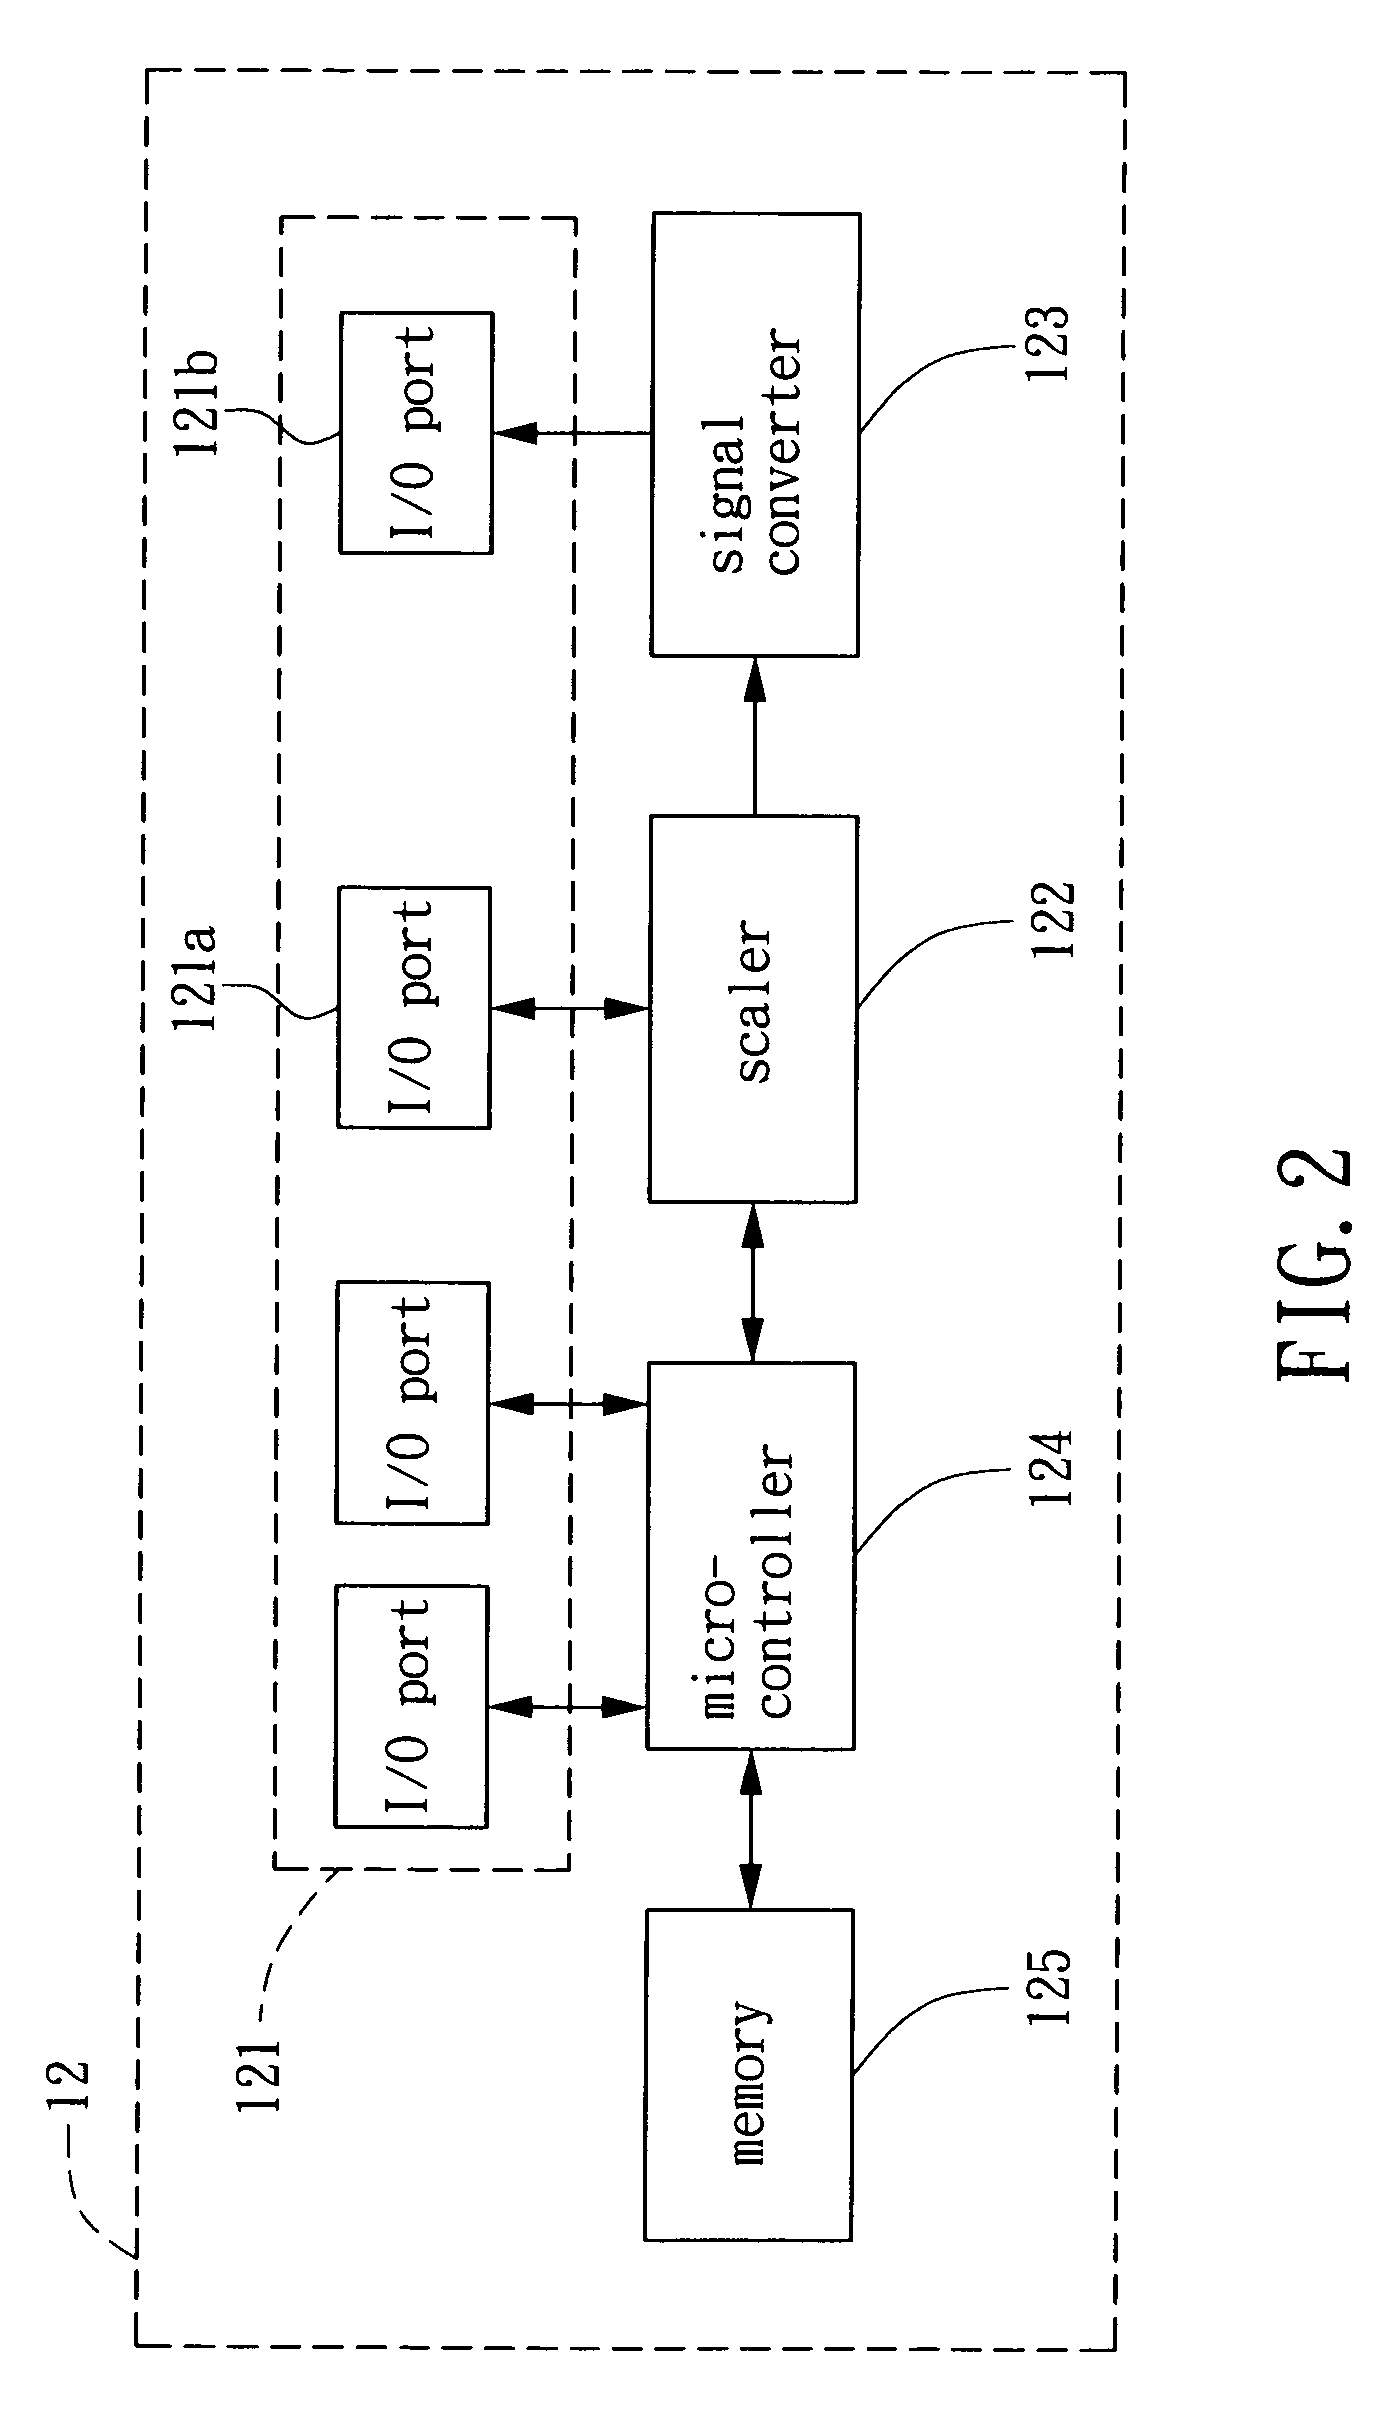 Measurement device for measuring gray-to-gray response time